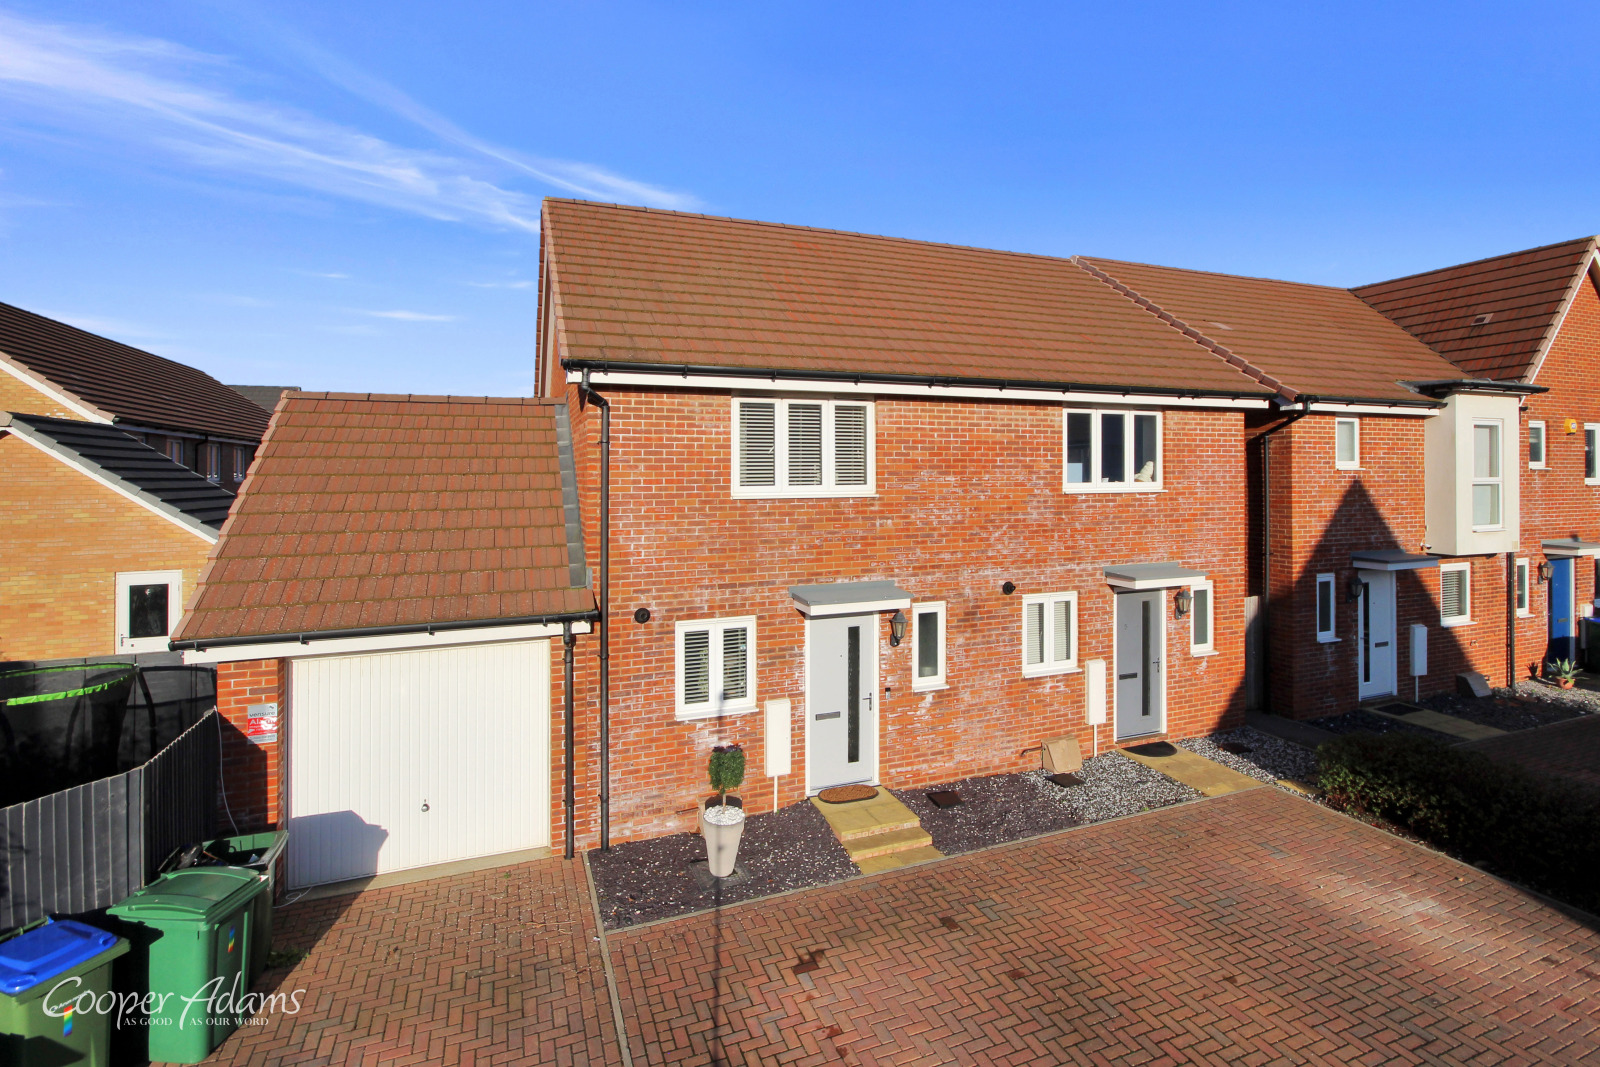 2 bed house for sale in Jackson Way, Littlehampton - Property Image 1